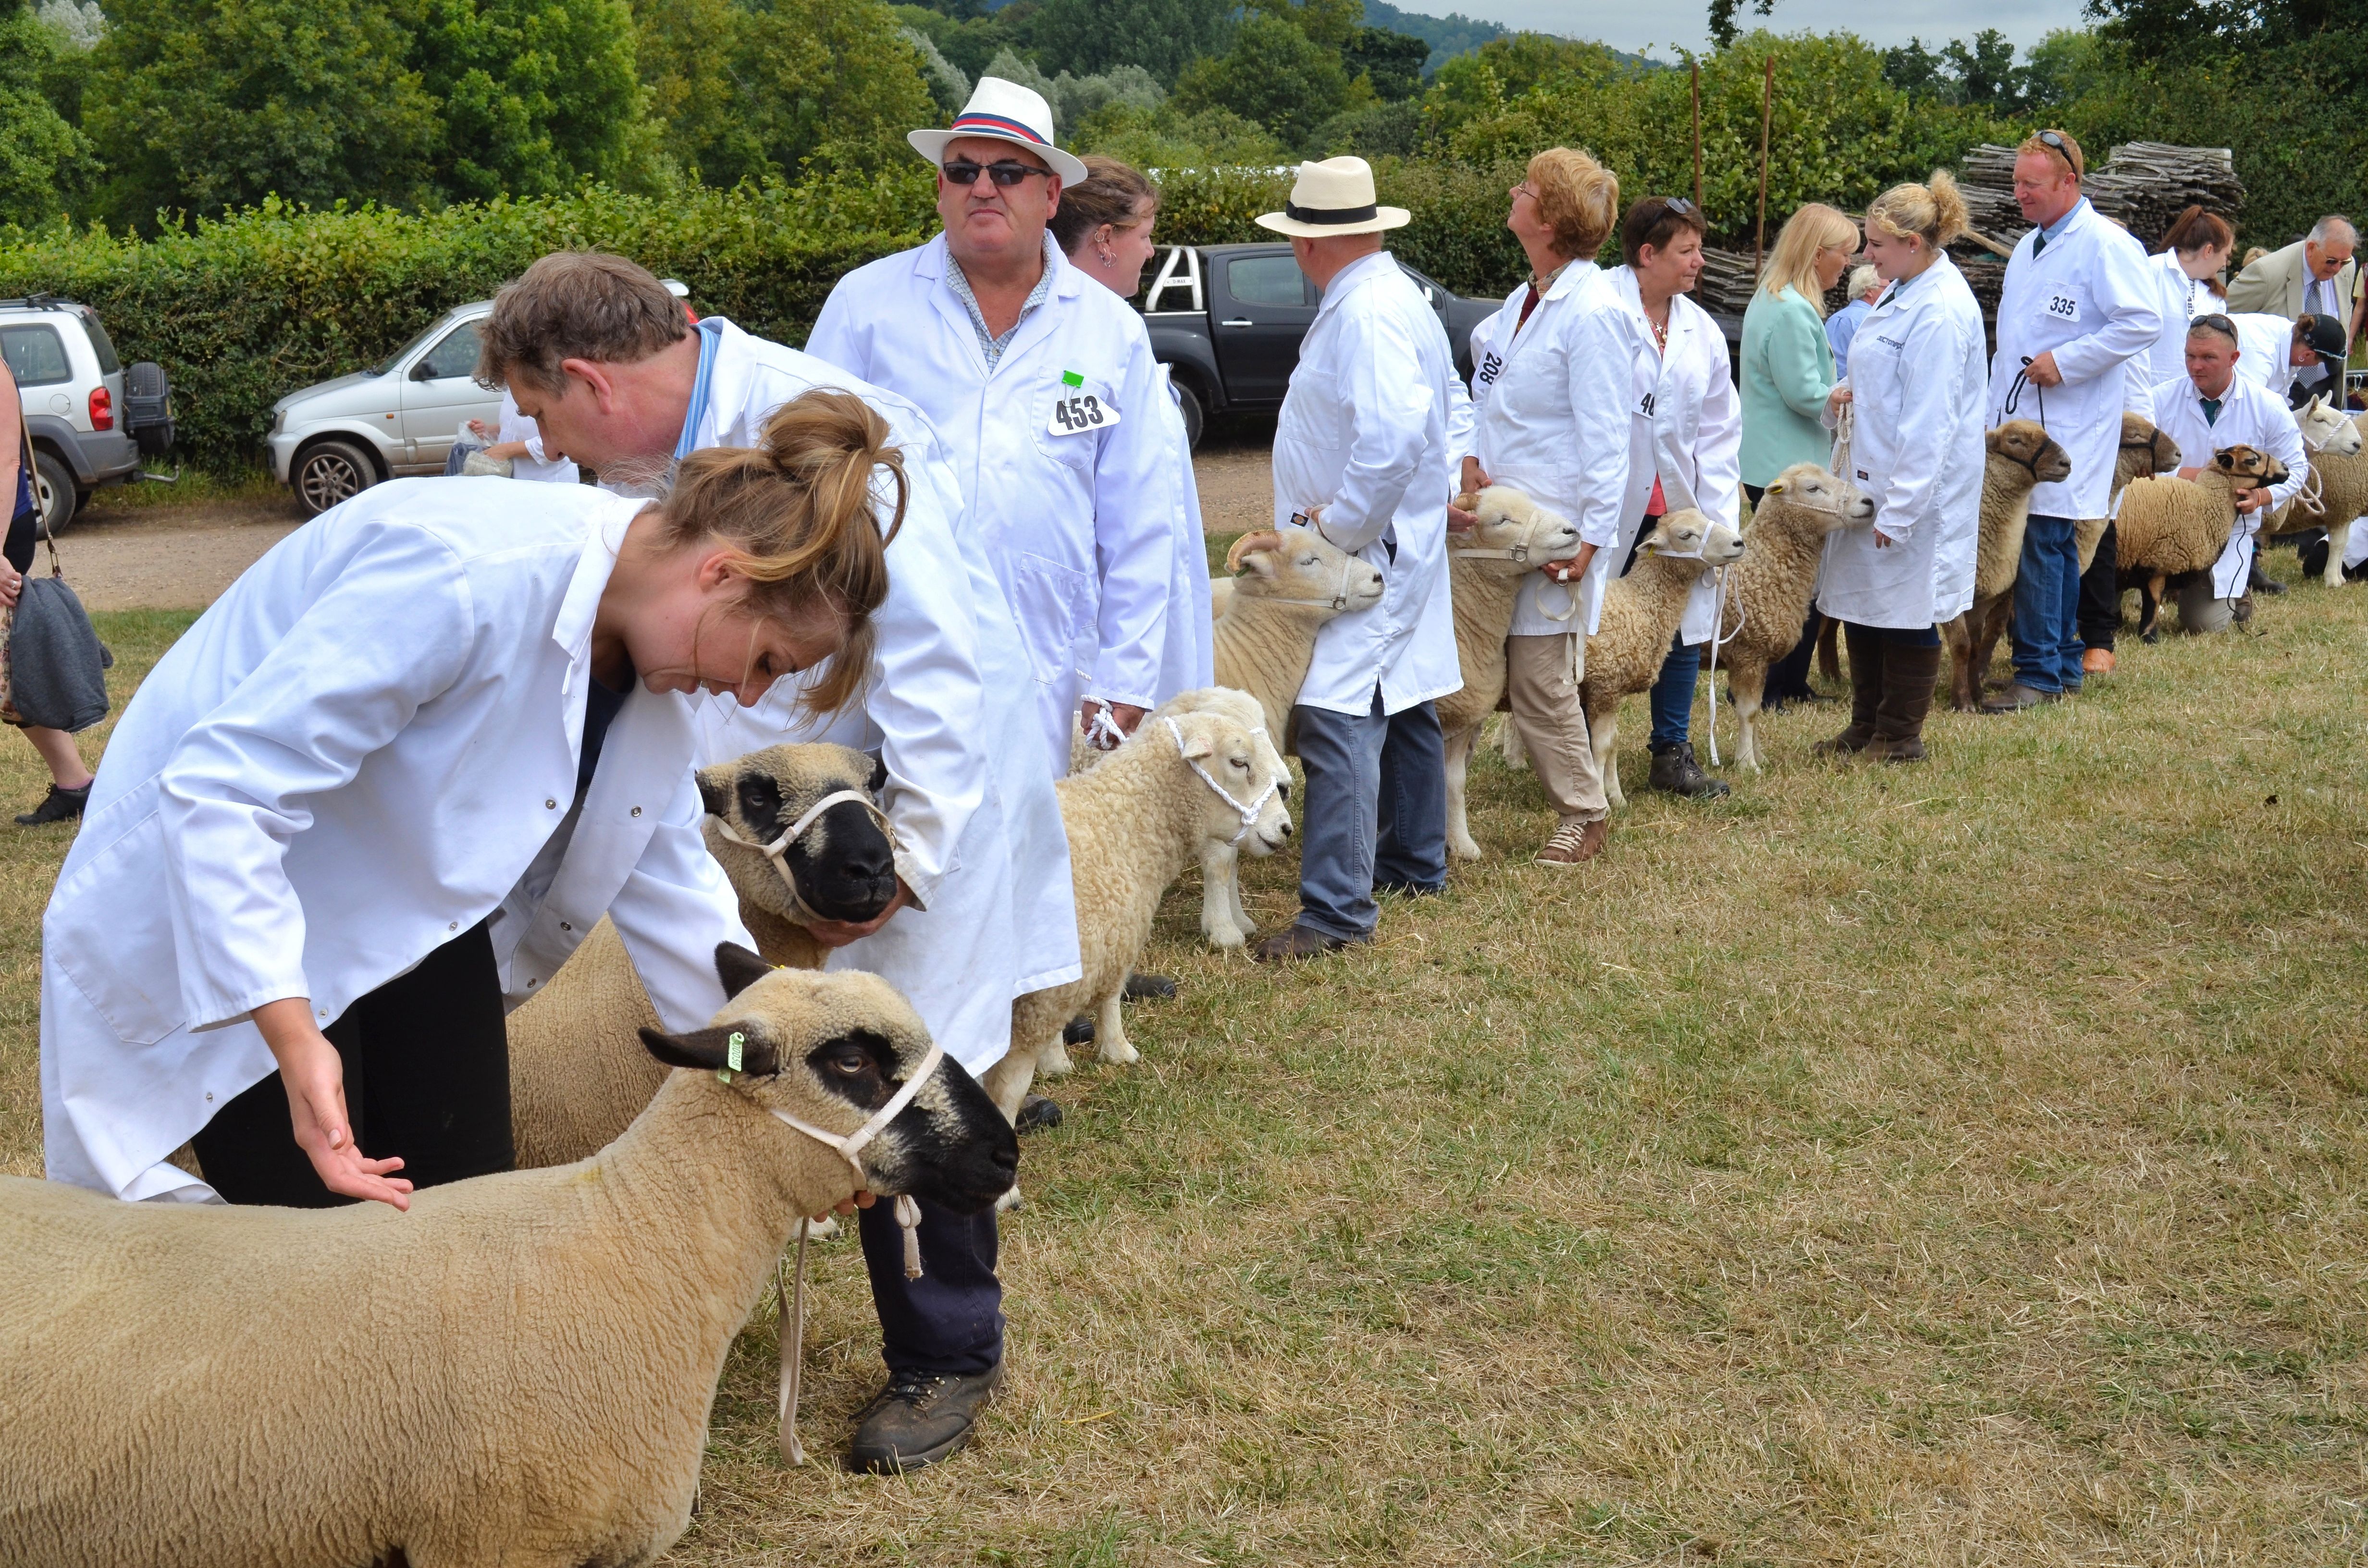 Showing sheep, Honiton Agricultural Show, Devon